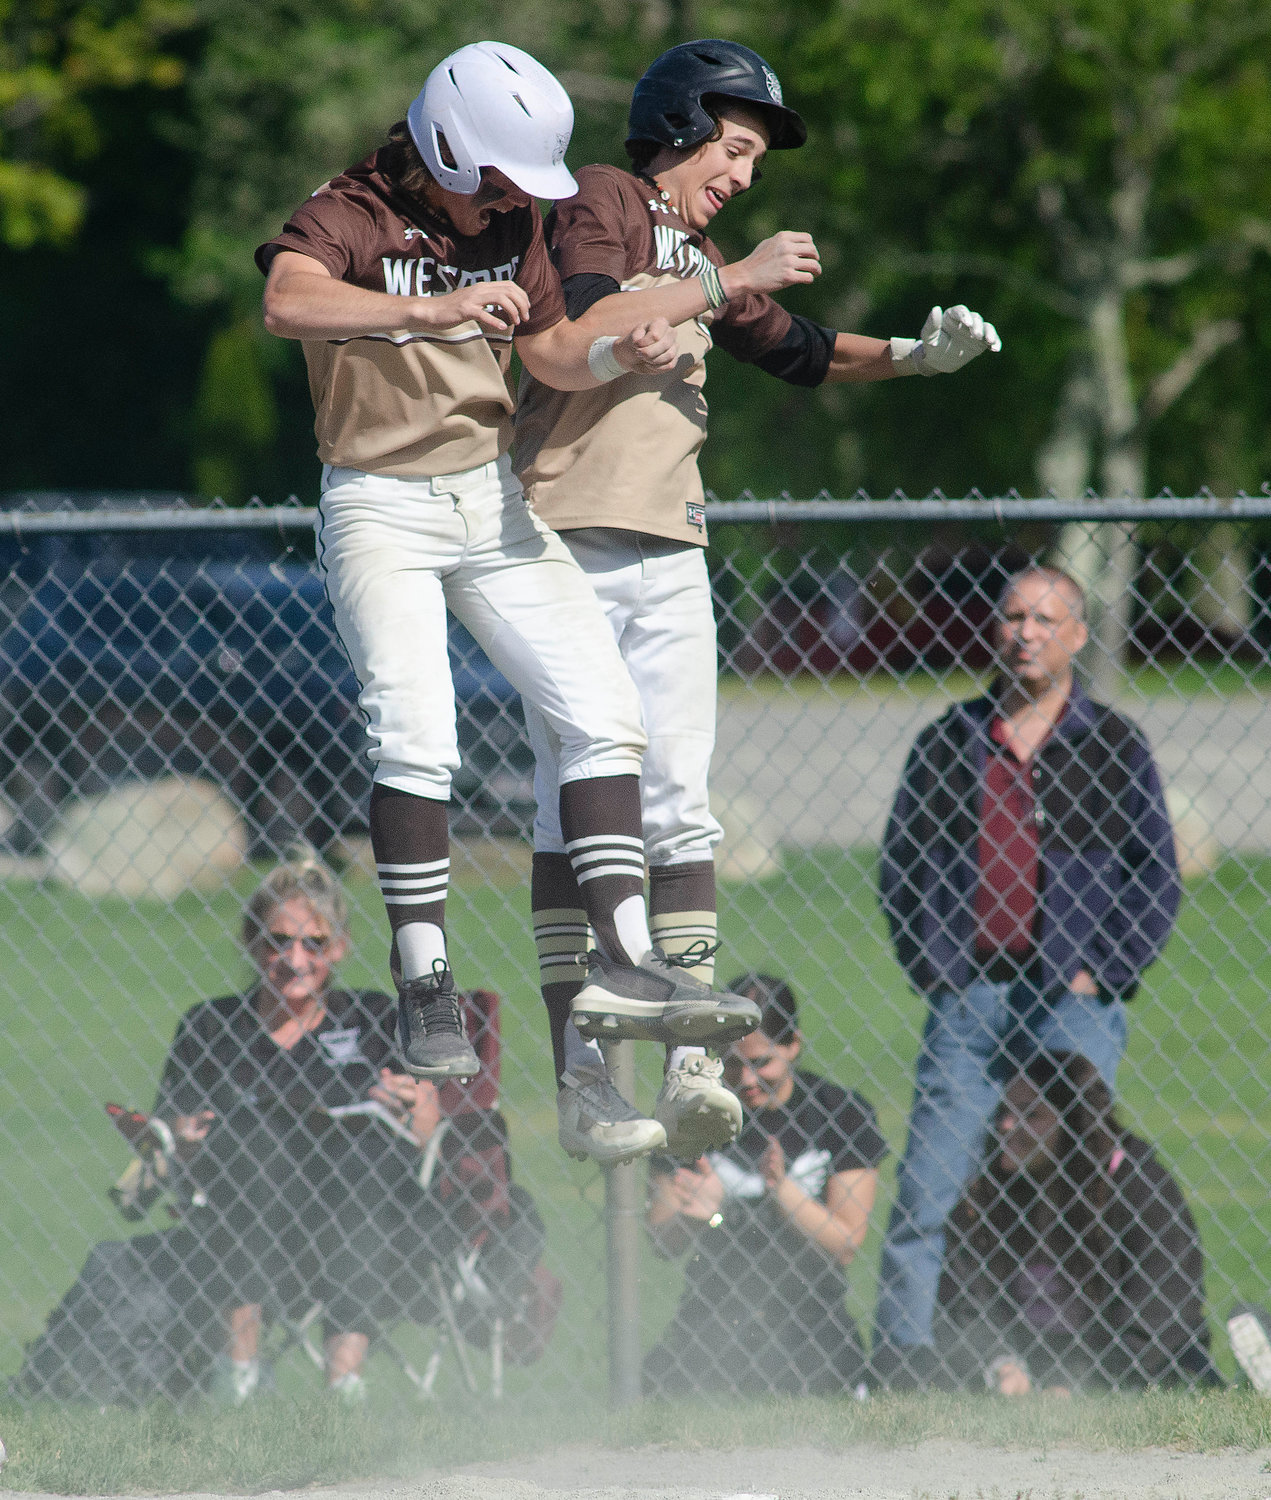 Noah Sowle and Ben Boudria celebrate after scoring in the third inning.